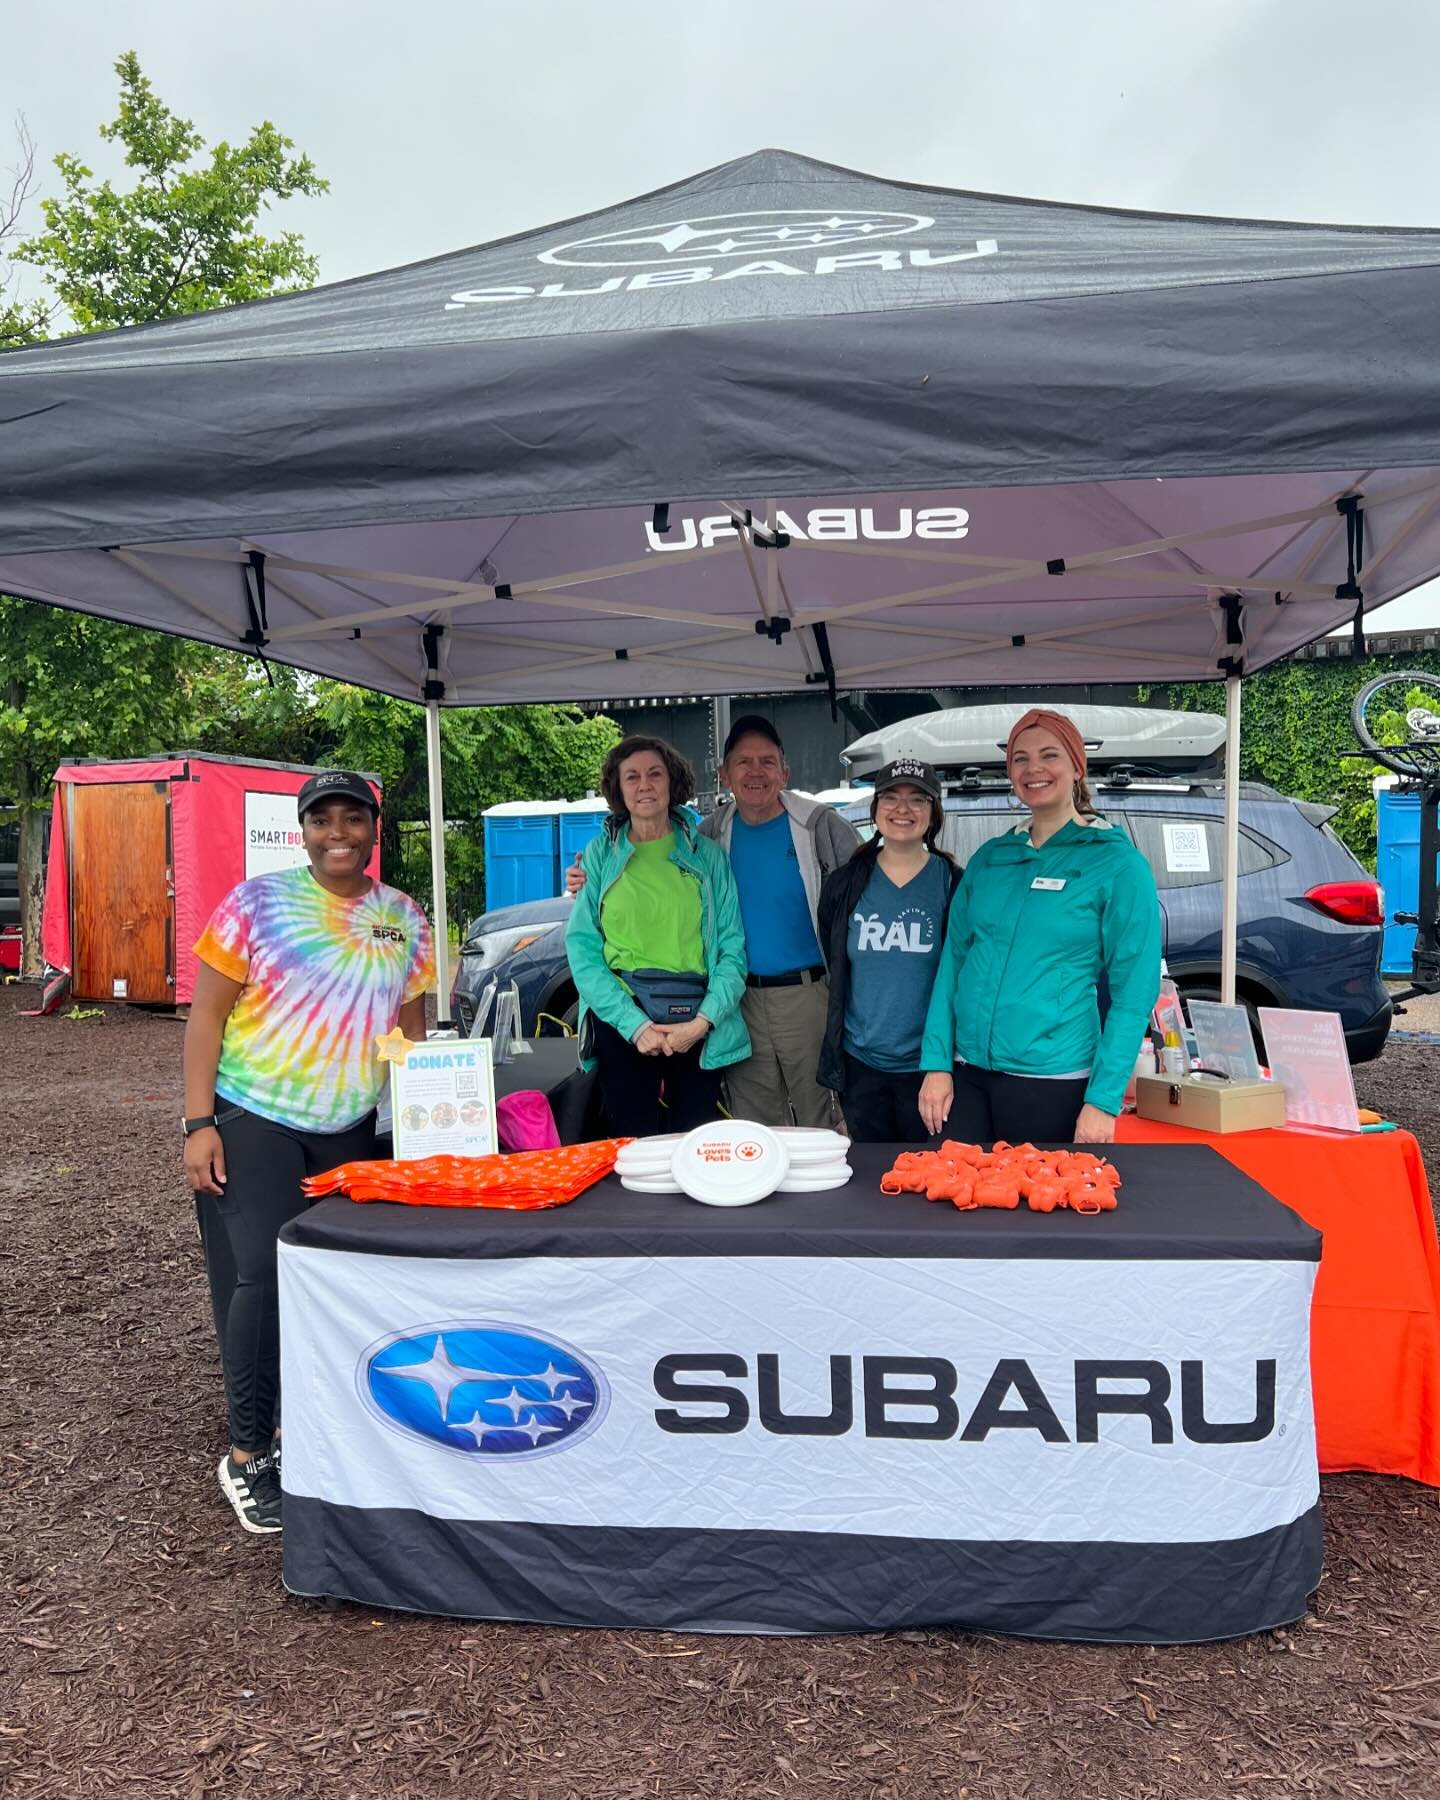 We had so much fun at @riverrockrva yesterday with @richmondspca! We&rsquo;re back at it today until 2:00 pm! Come say hi! Donations made to both RAL and Richmond SPCA during Riverrock will be matched by @subaru_usa 😻 PLUS Subaru is selling some gre